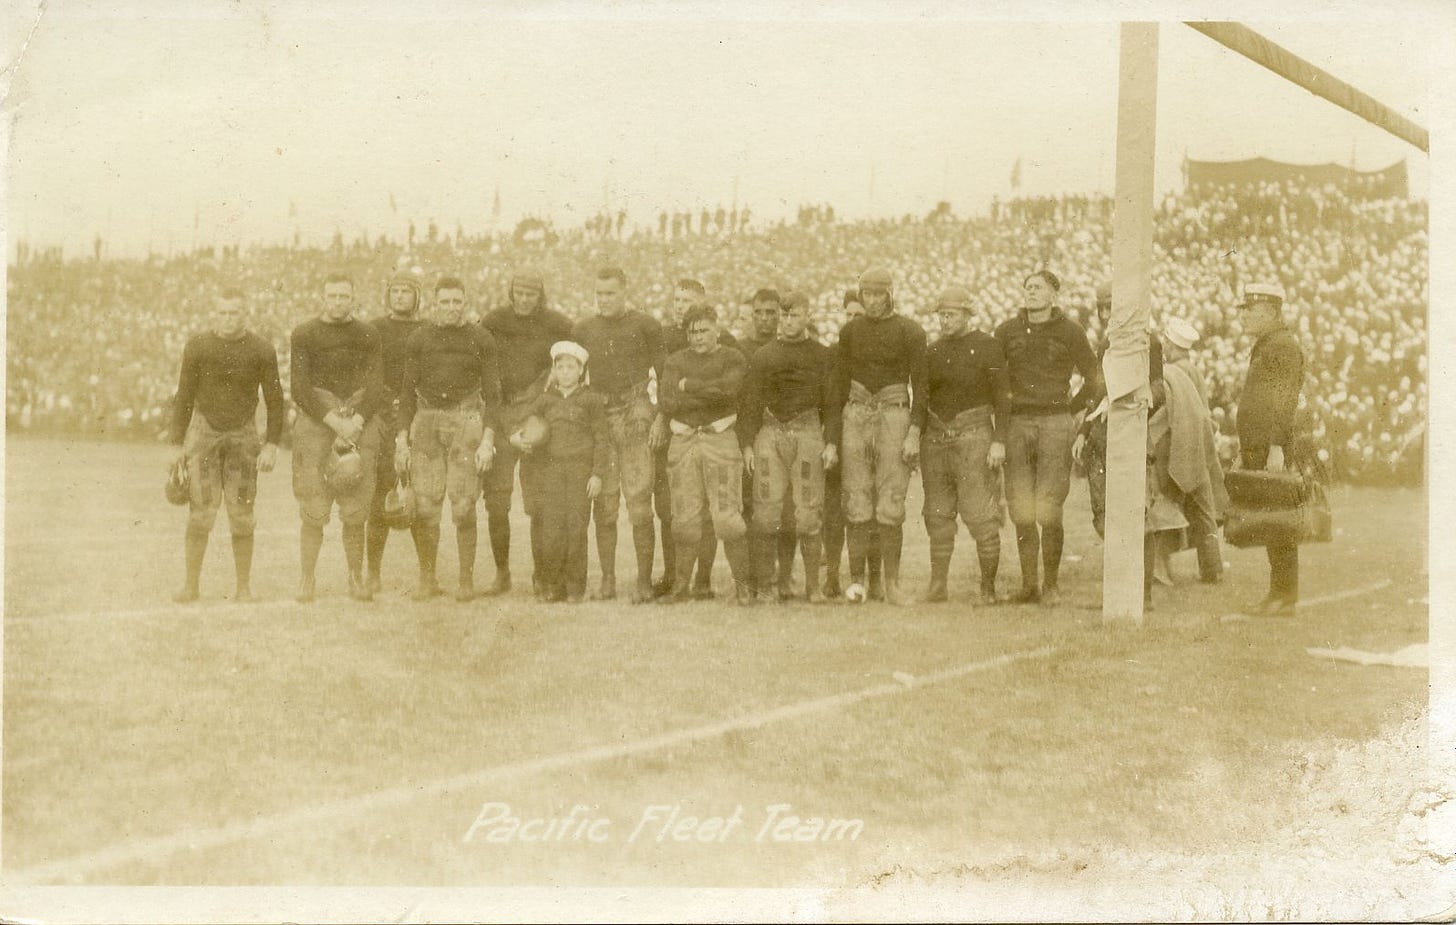 Pacific Fleet Team at Tournament Park for 1921 Armistice Day game